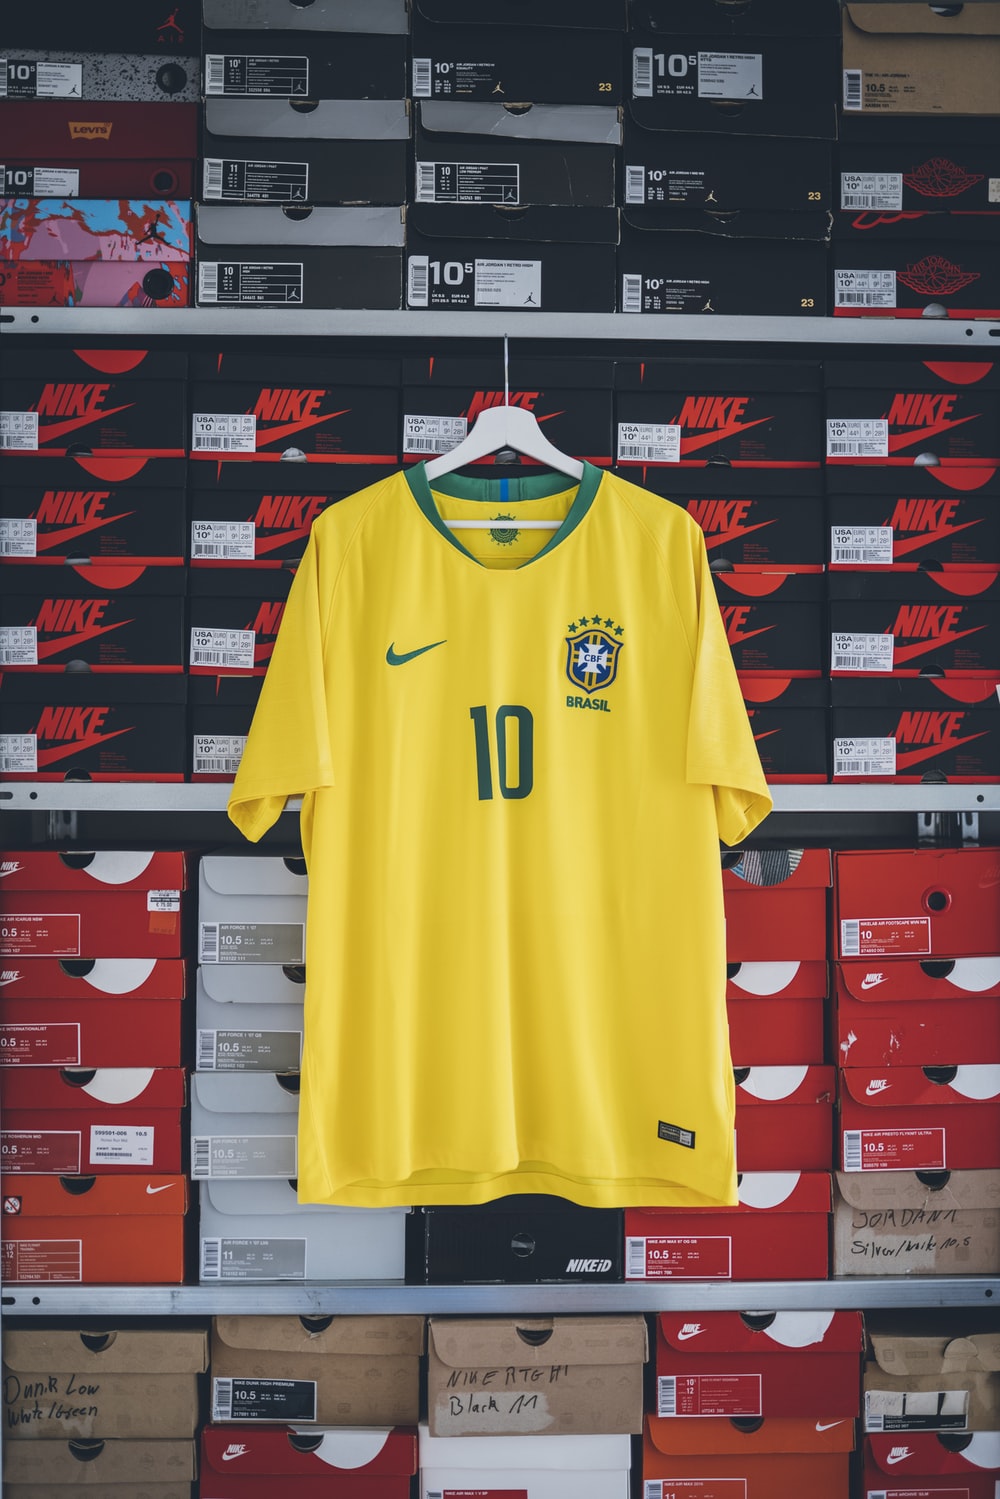 Football Shirt Picture. Download Free Image